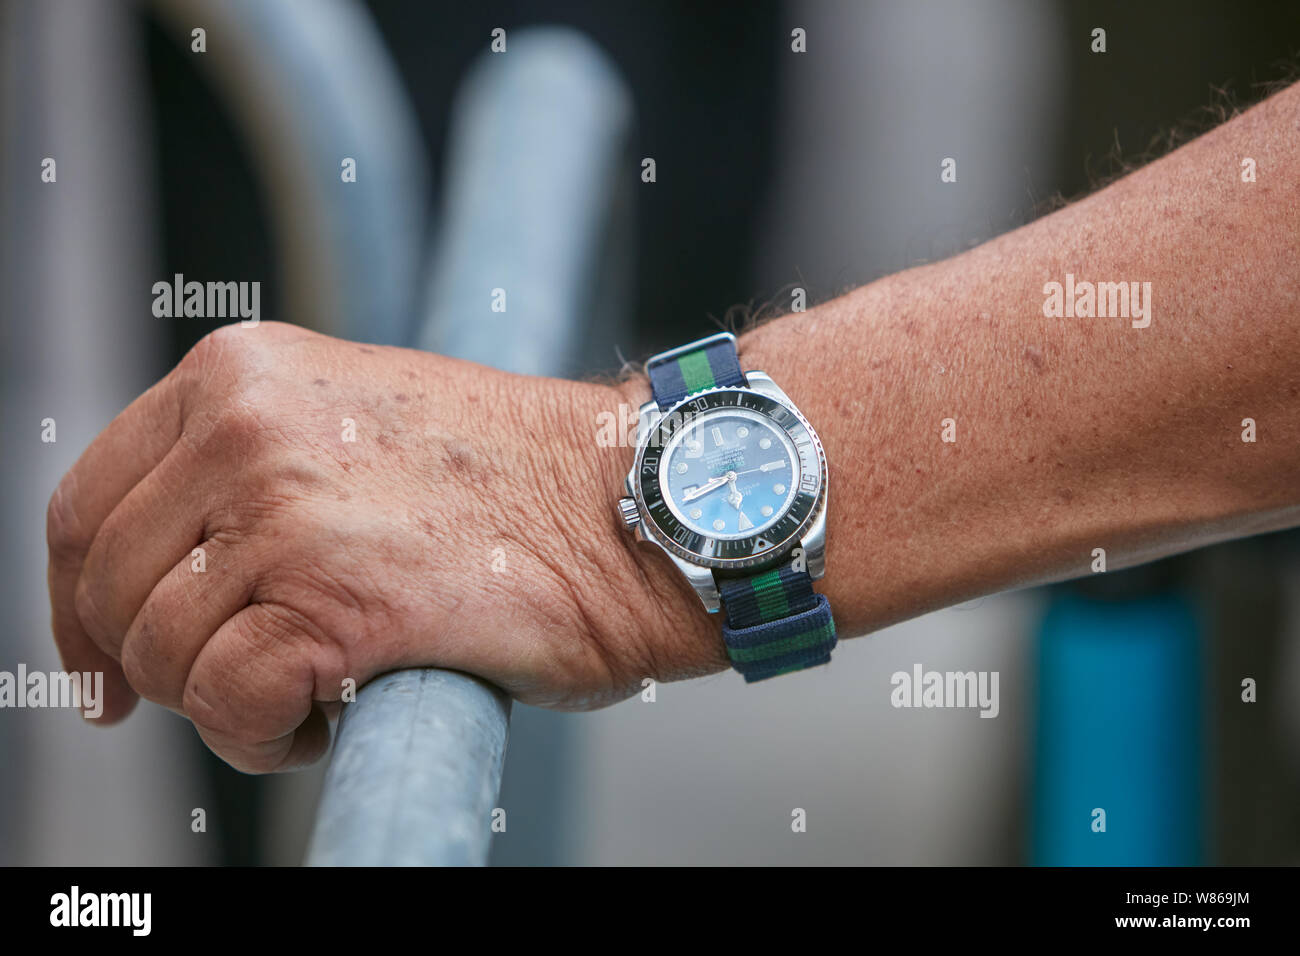 MILAN, ITALY - JUNE 15, 2019: Man with Rolex Deepsea Sea Dweller watch with striped fabric strap before Emporio Armani fashion show, Milan Fashion Wee Stock Photo